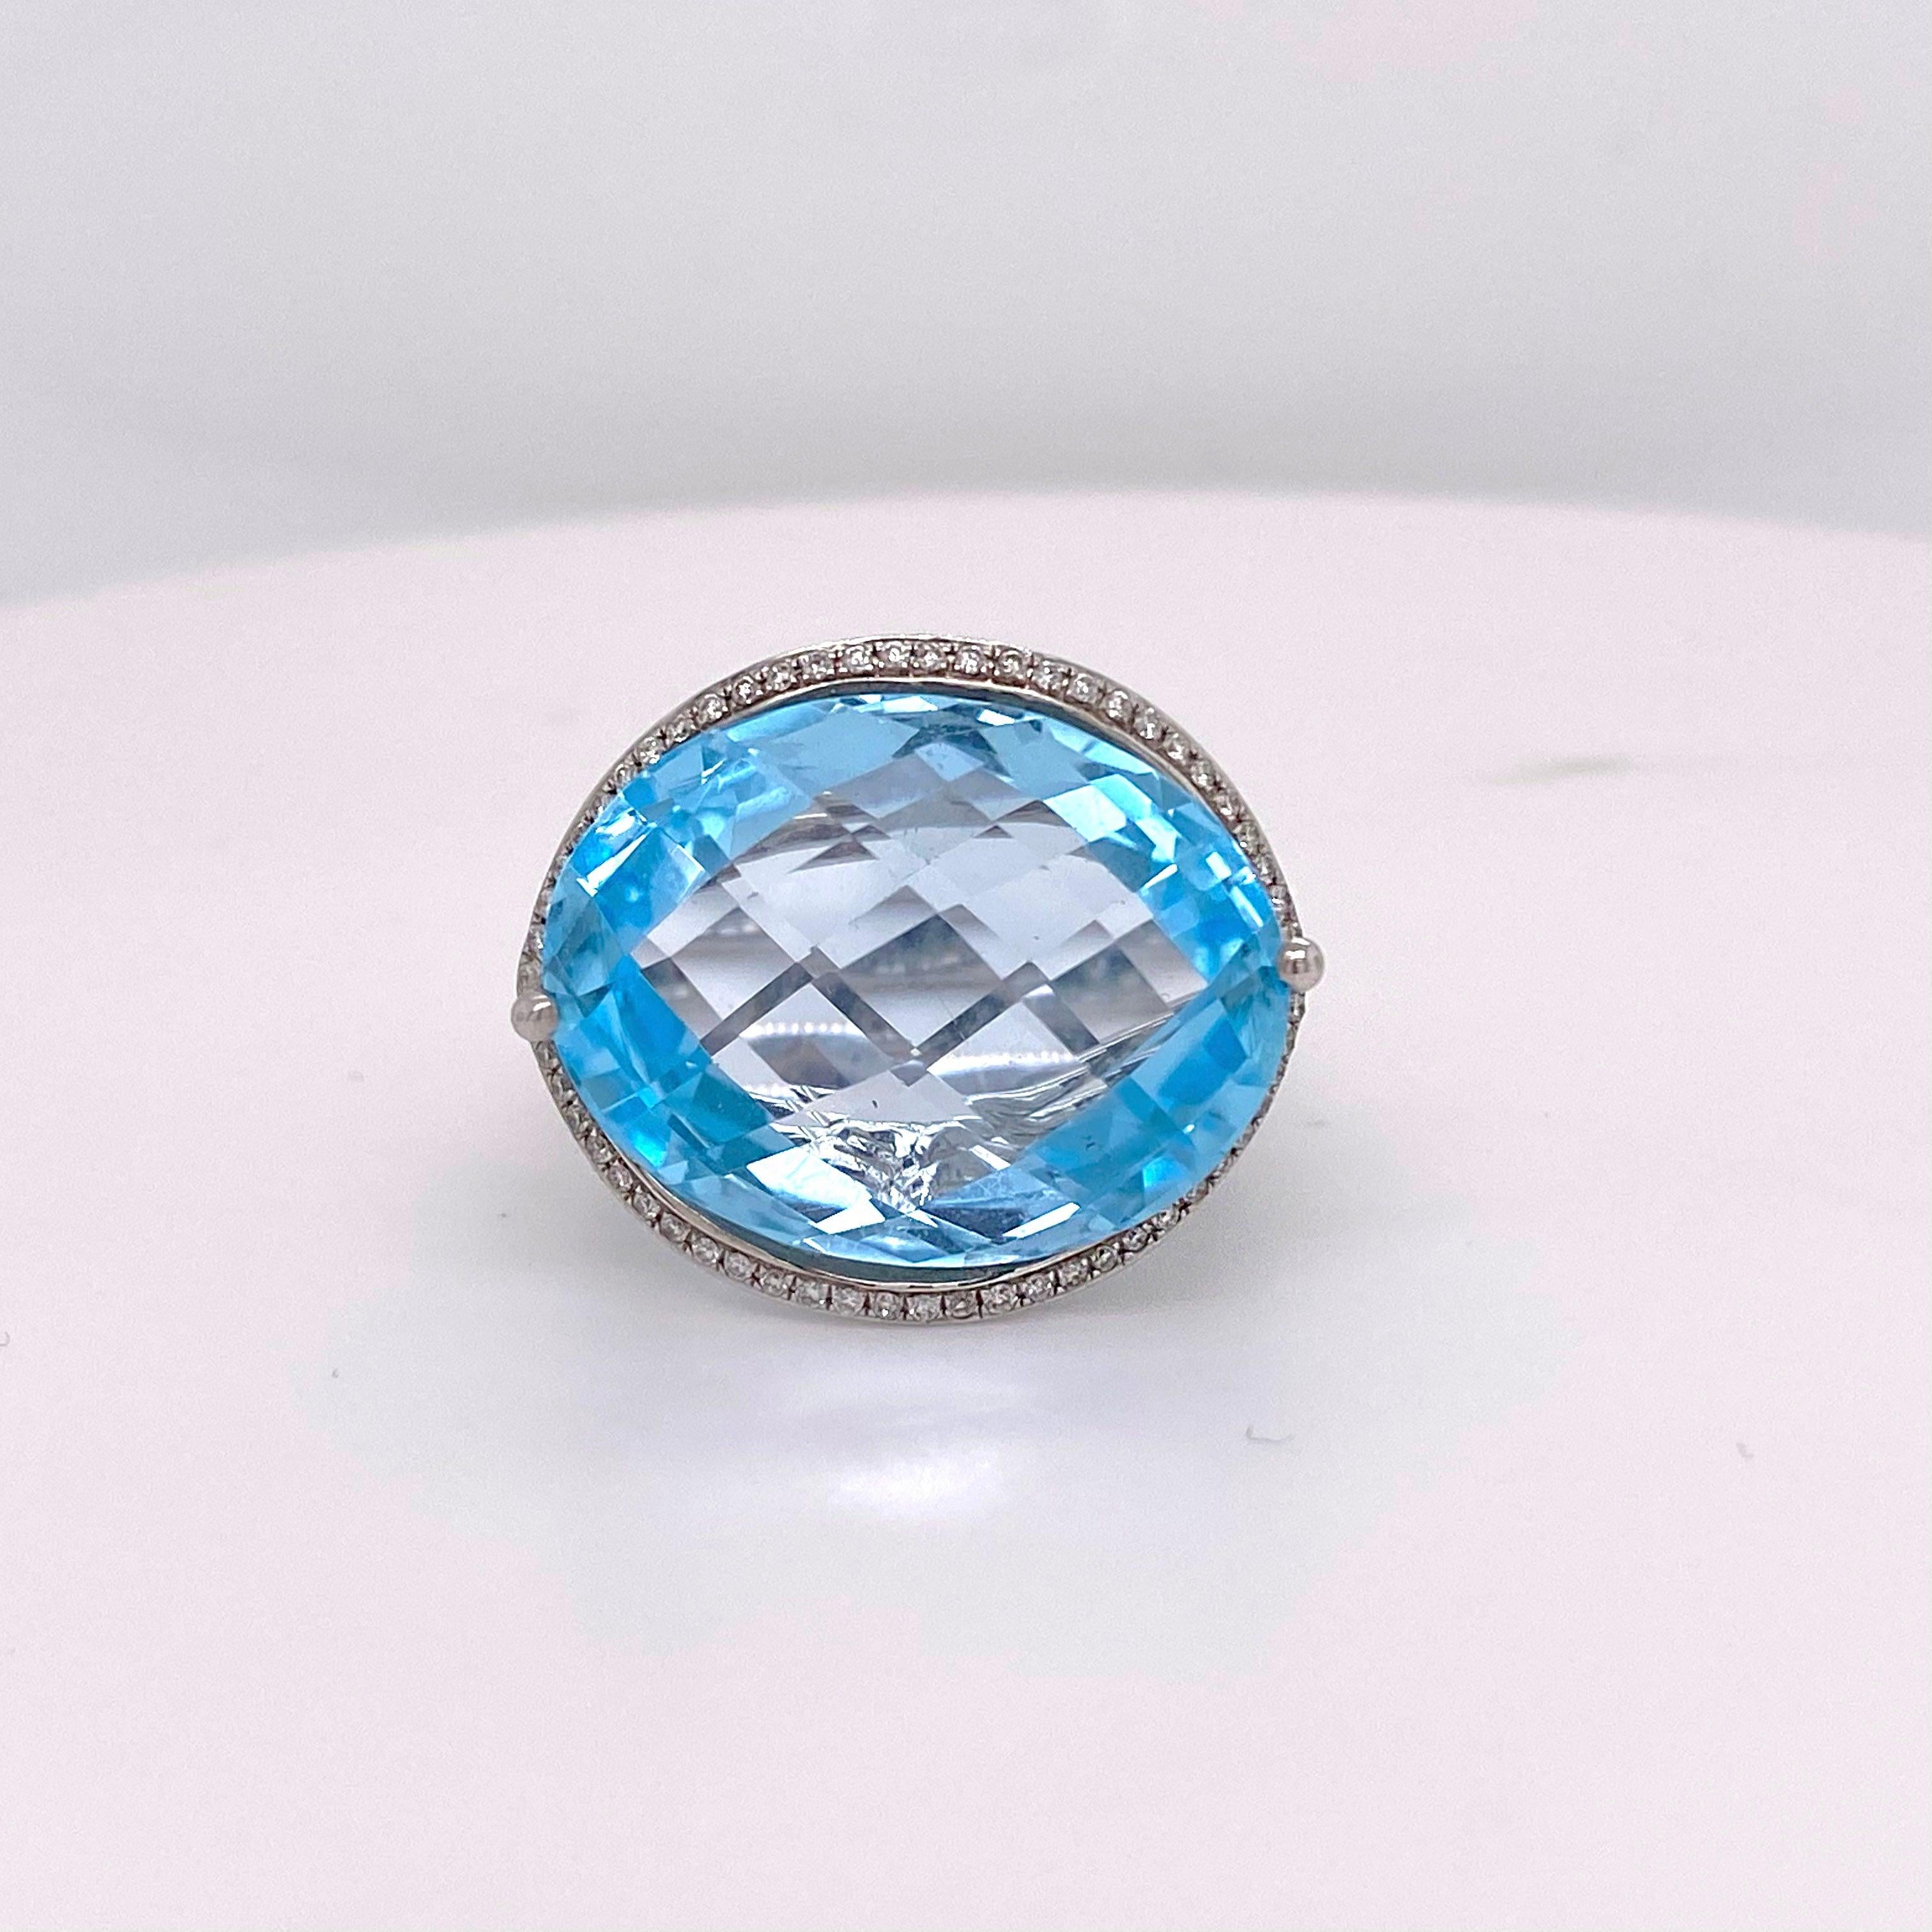 Blue Topaz Ring, with Diamonds White Gold, Genuine Checkerboard Cut Natural Gem 3